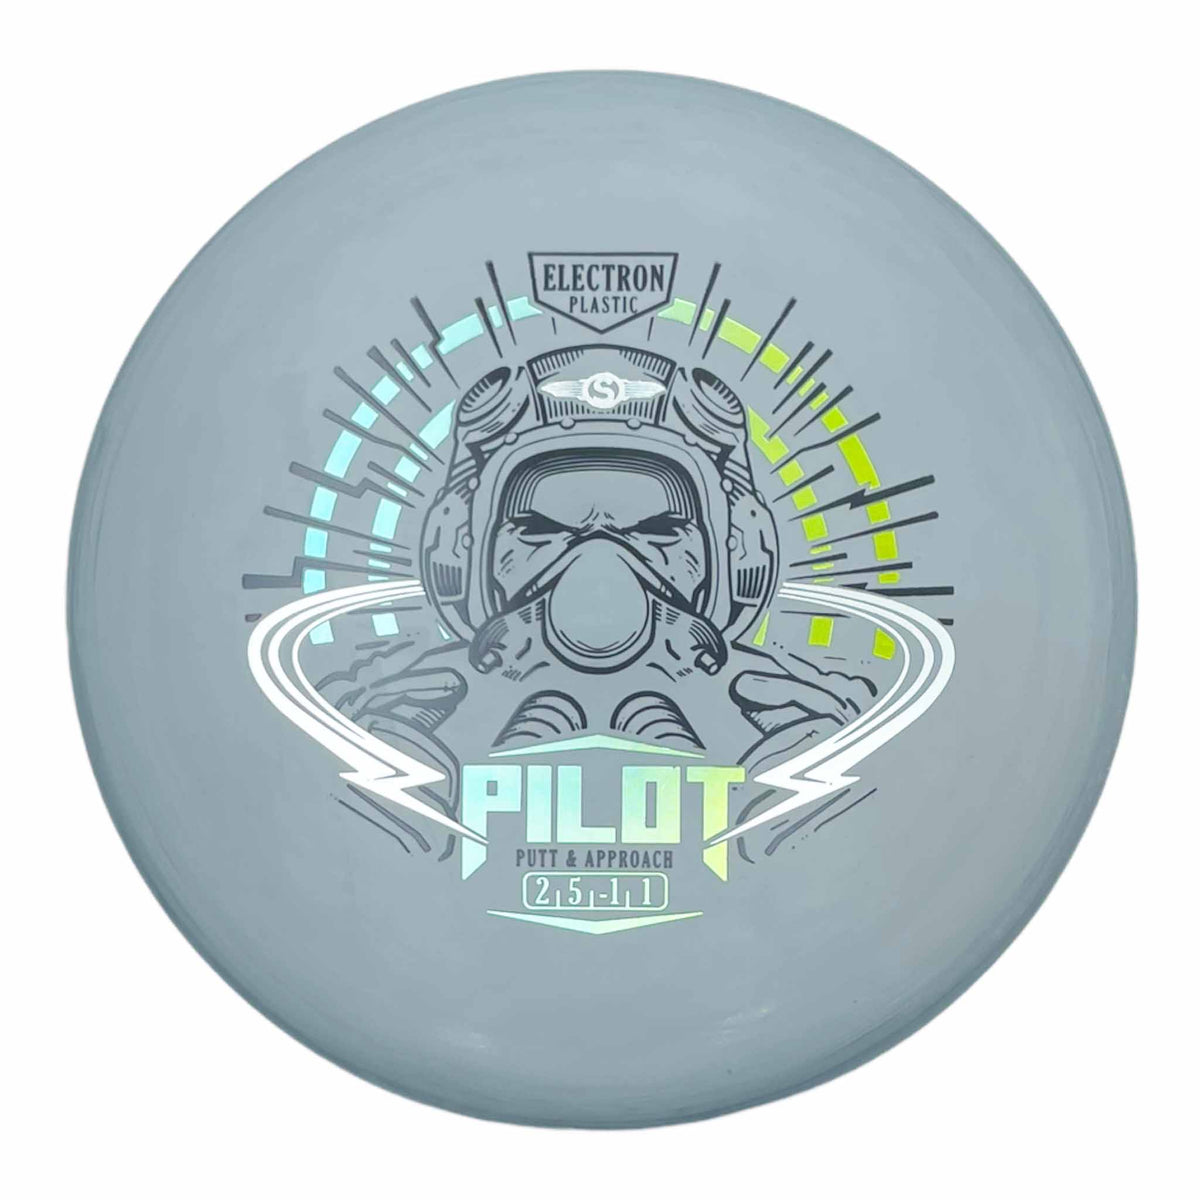 Streamline Discs Electron Pilot putter and approach - Grey